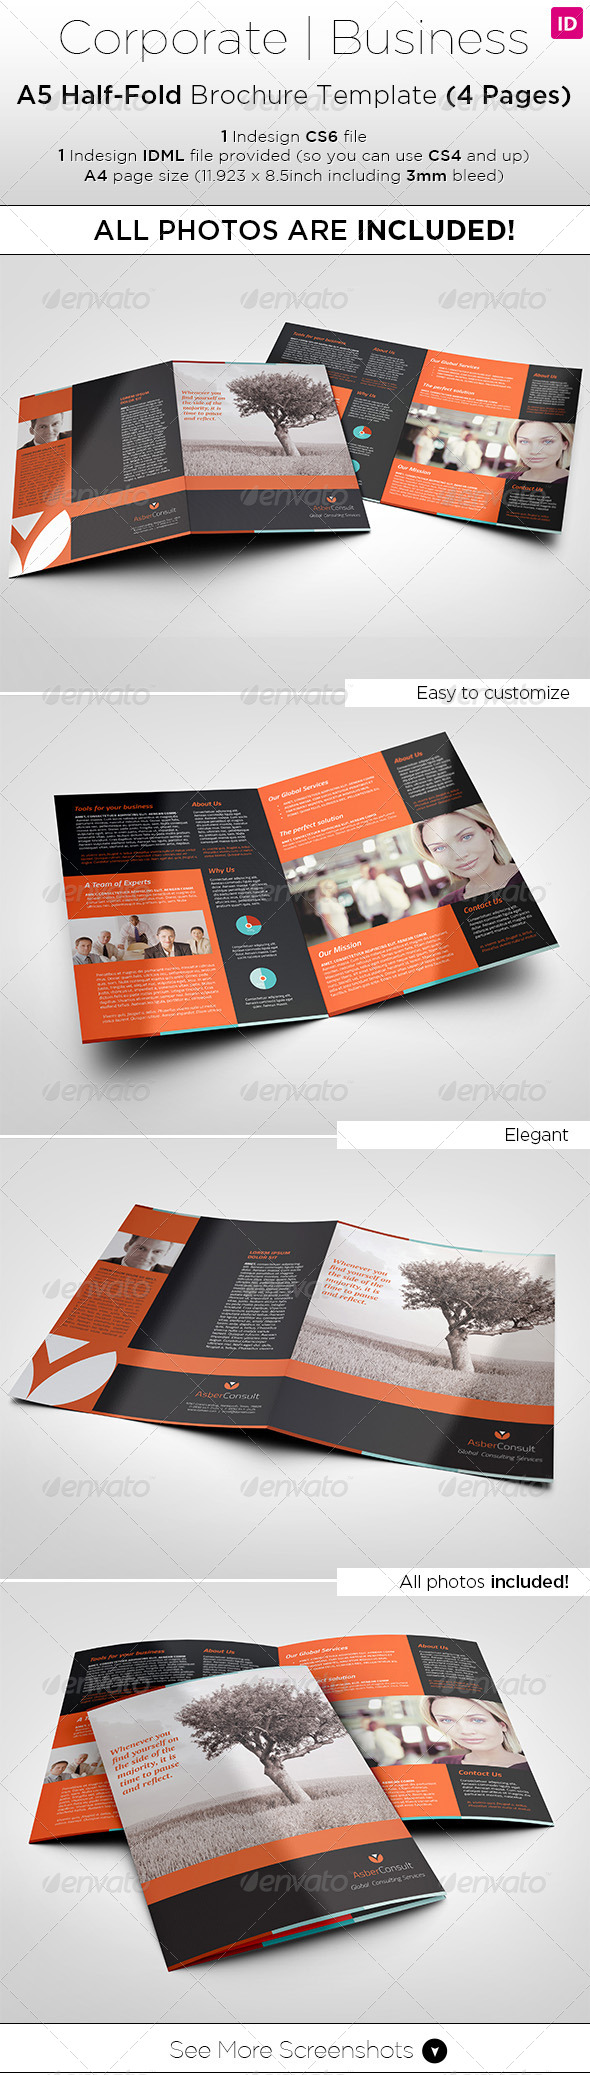 A5 Half-Fold Brochure (4 pages) - Photo Included